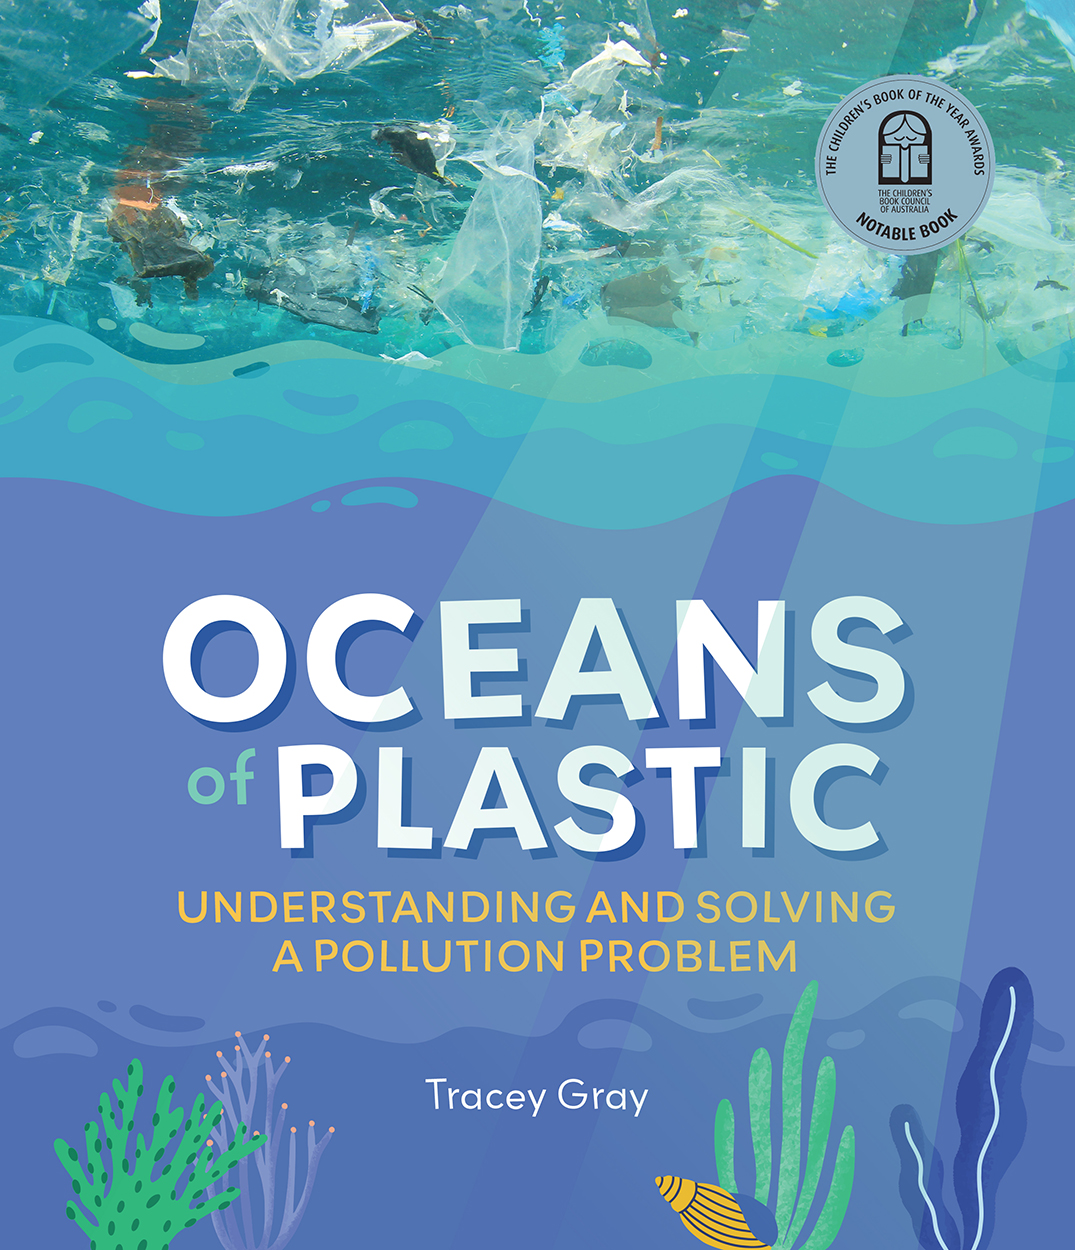 Cover of 'Oceans of Plastic', featuring the title on a blue background with coral and seaweed below, and a photo of plastic floating in the water abov